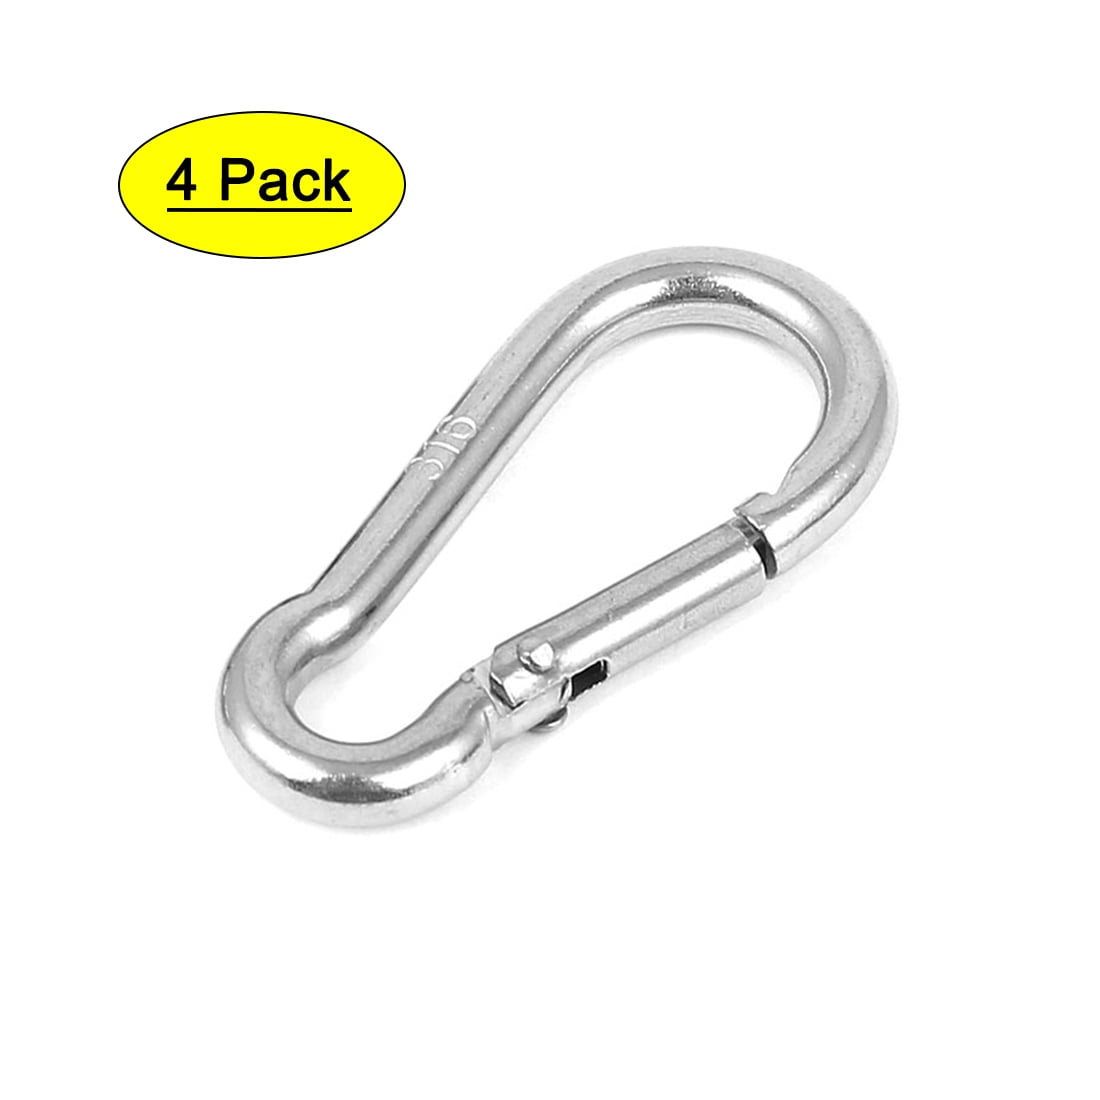 10pc Stainless Steel Snap Clip Carabiner Buckle Split D-Ring Spring Chain Silver 